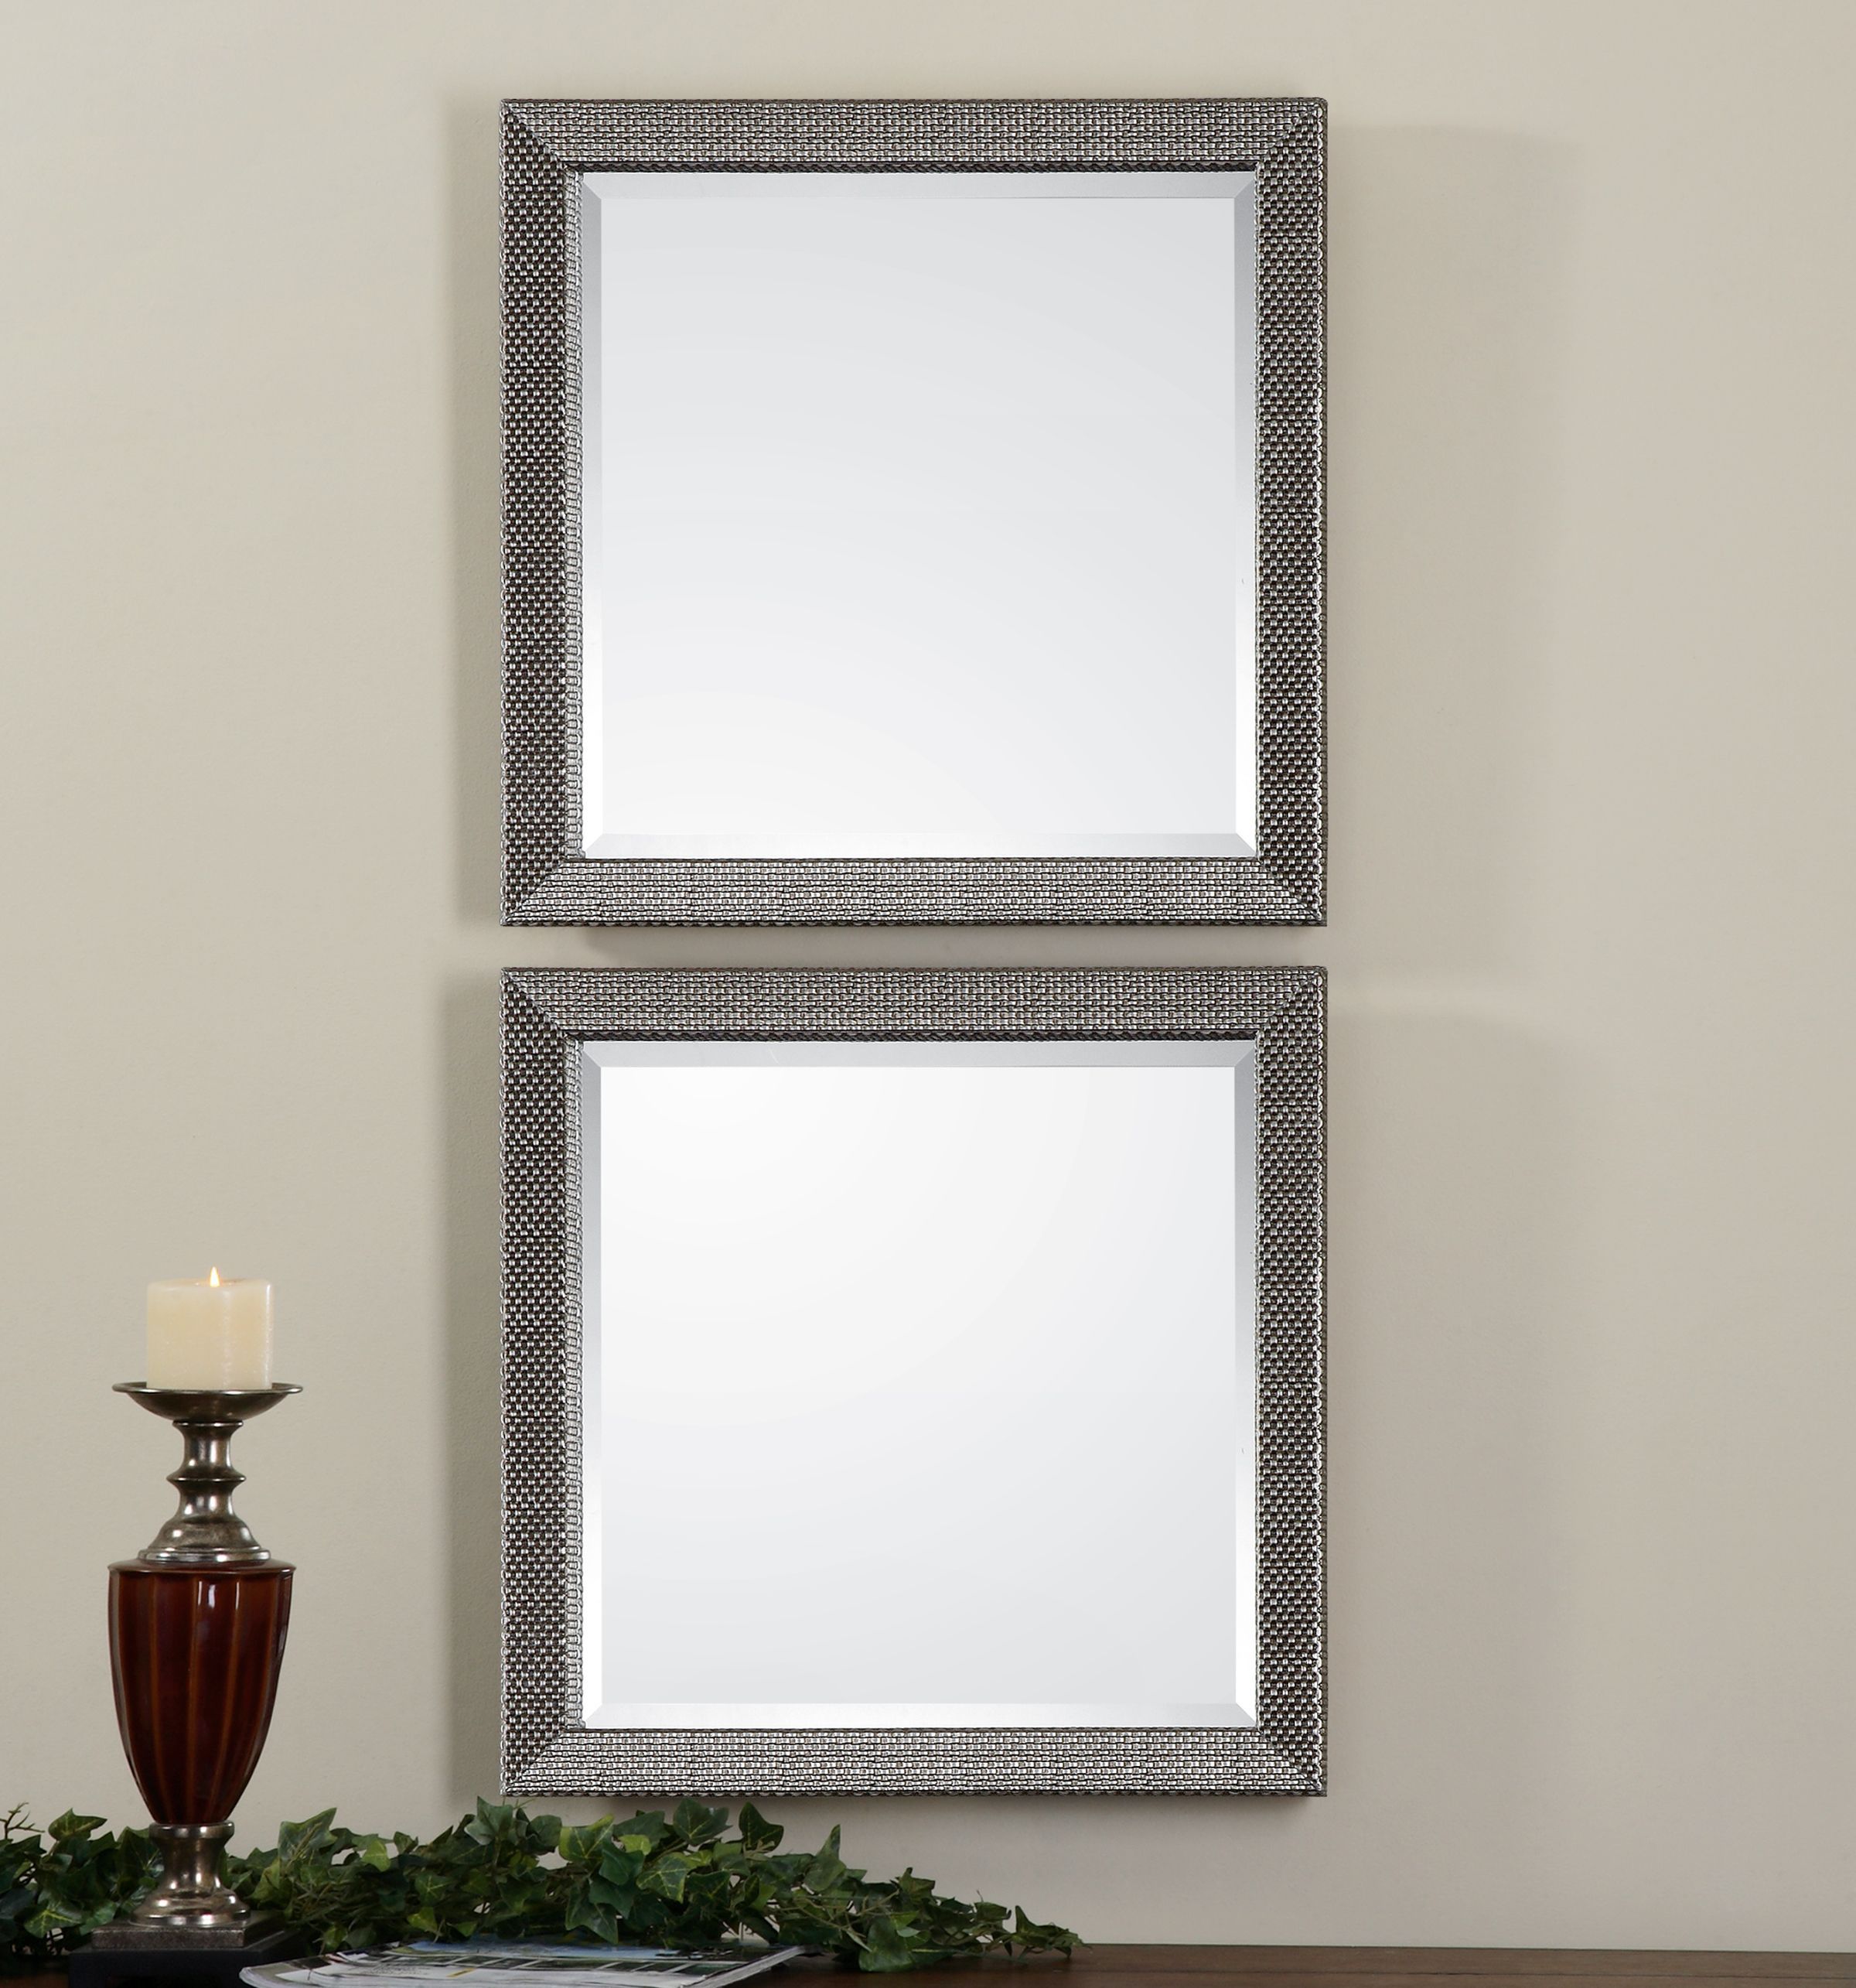 Uttermost Allia Silver Square Mirrors, Set Of 2 14608 Within Traditional Square Glass Wall Mirrors (Photo 5 of 30)